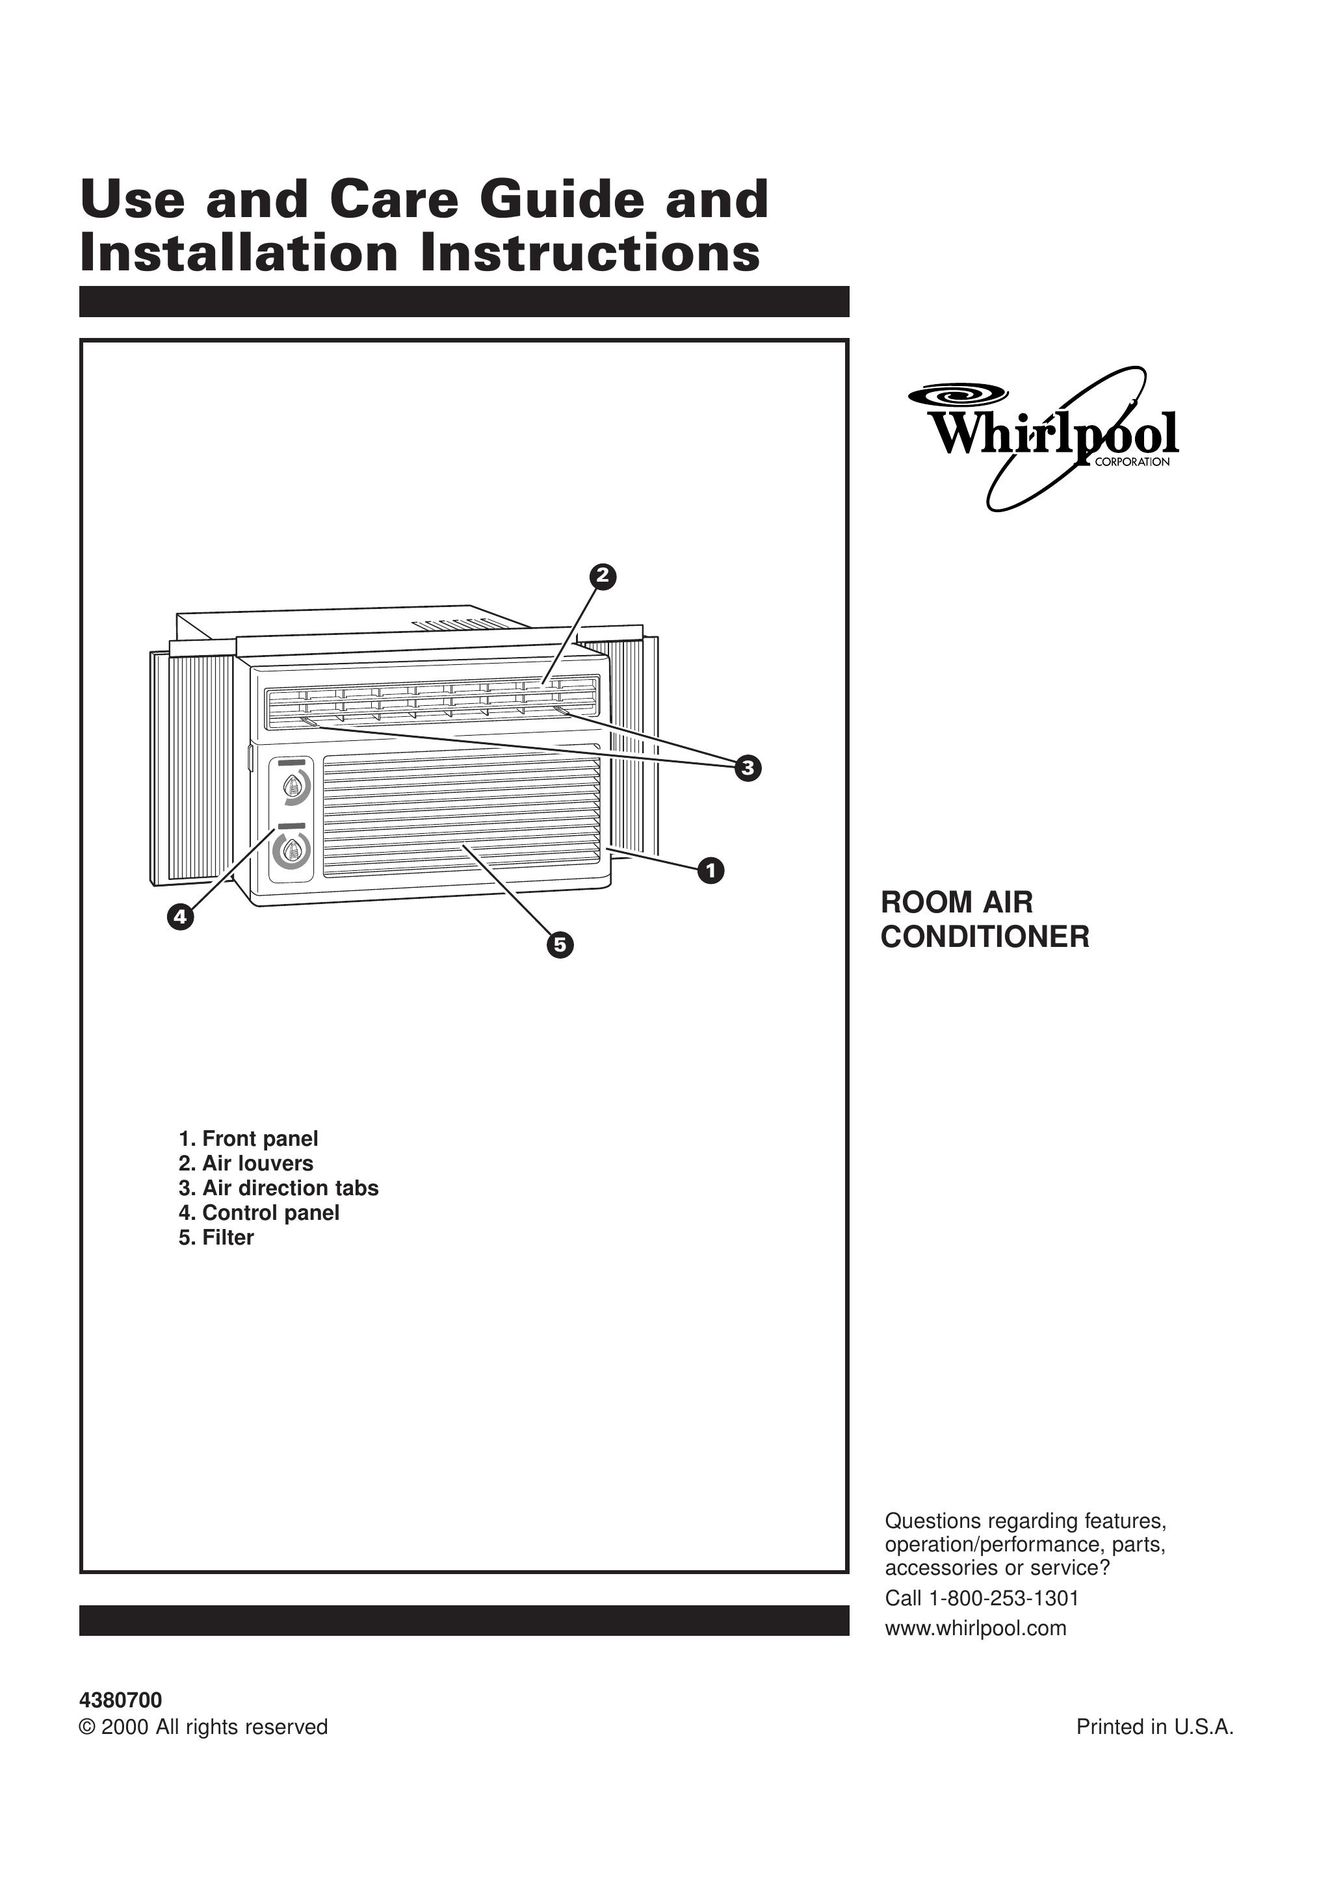 Whirlpool ACD052PK0 Air Conditioner User Manual